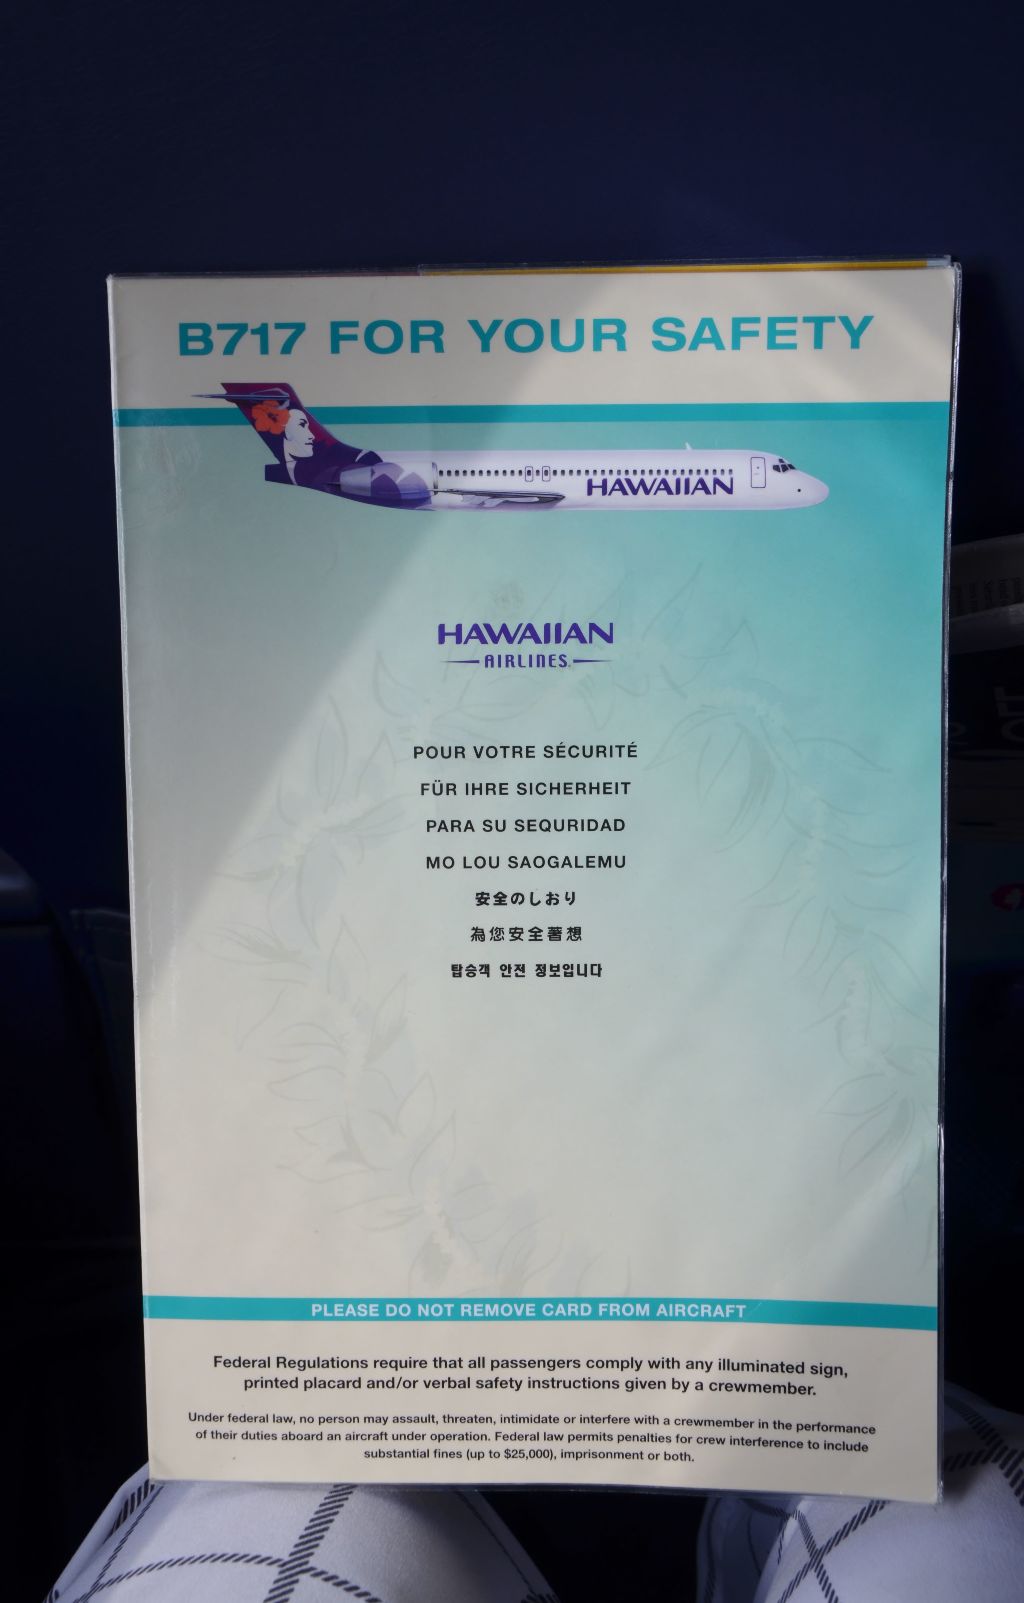 Hawaiian Airlines Boeing 717 200 first class cabin safety card photos